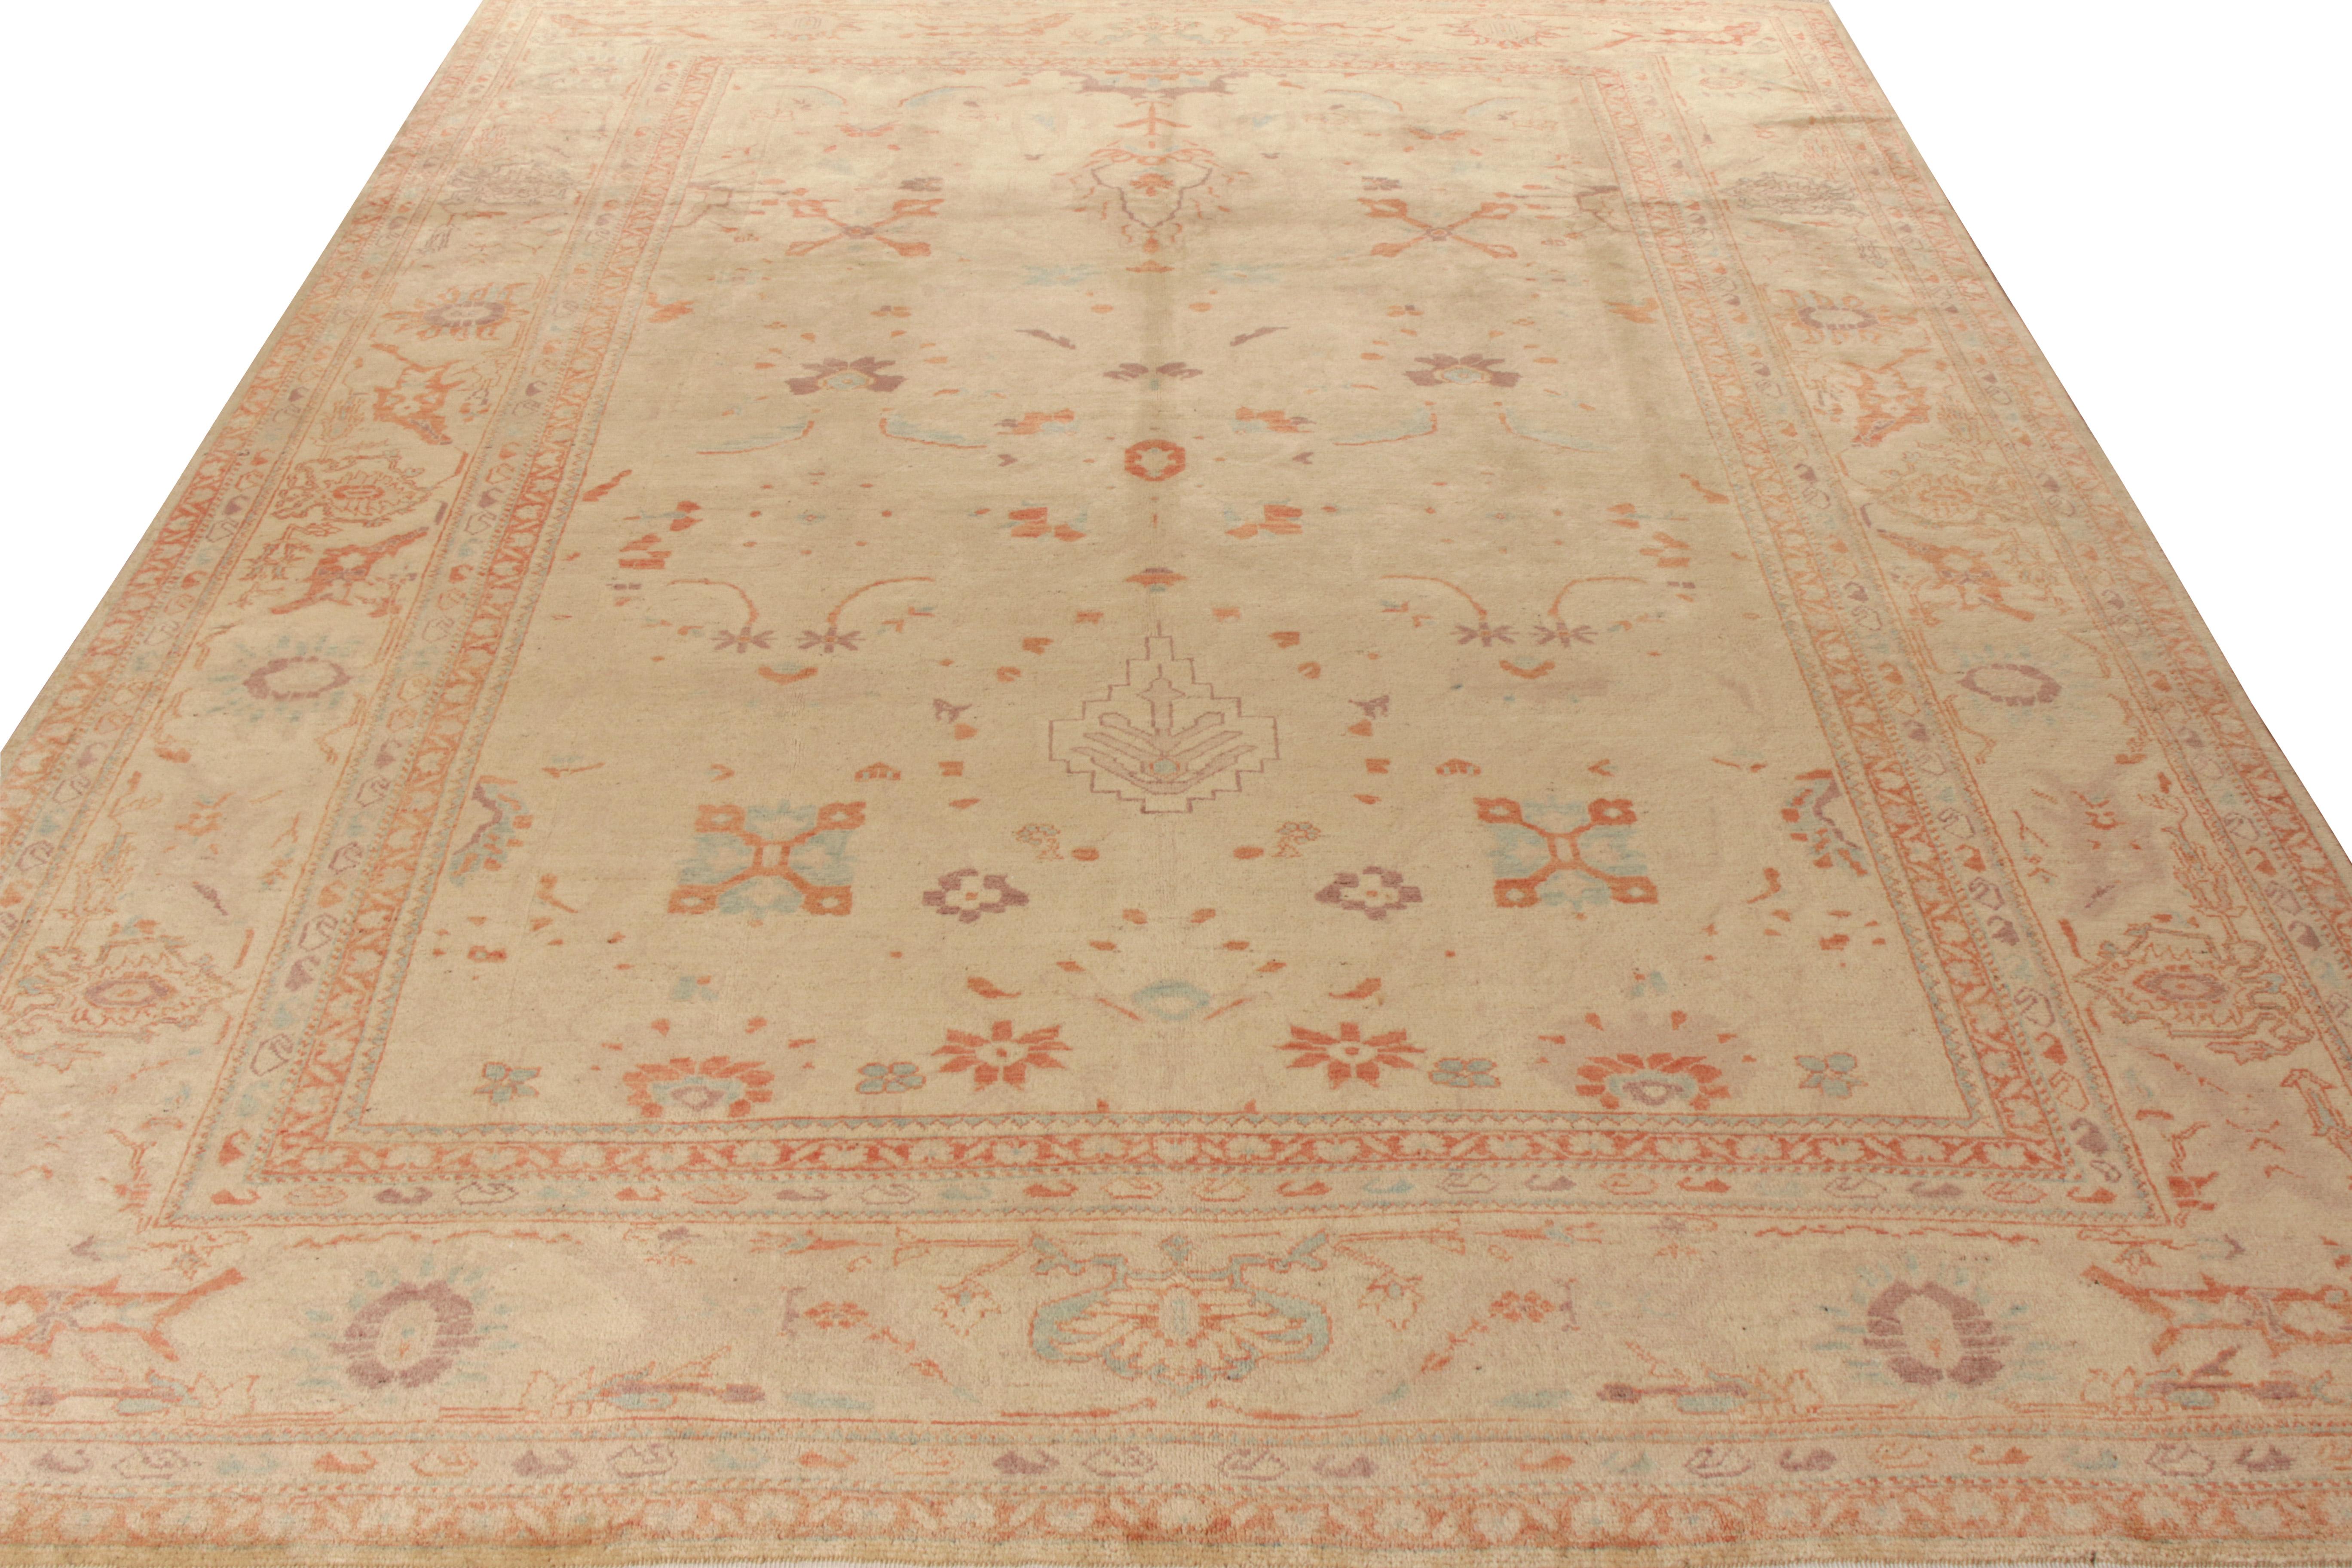 A 10 x 12 vintage Turkish Sultanabad style rug in beige and orange from Rug & Kilim’s Modern Classics Collection. Hand knotted in wool, the rug is an exceptional modern sketch from the works of George Ravmamovich, revelling in regal floral patterns.